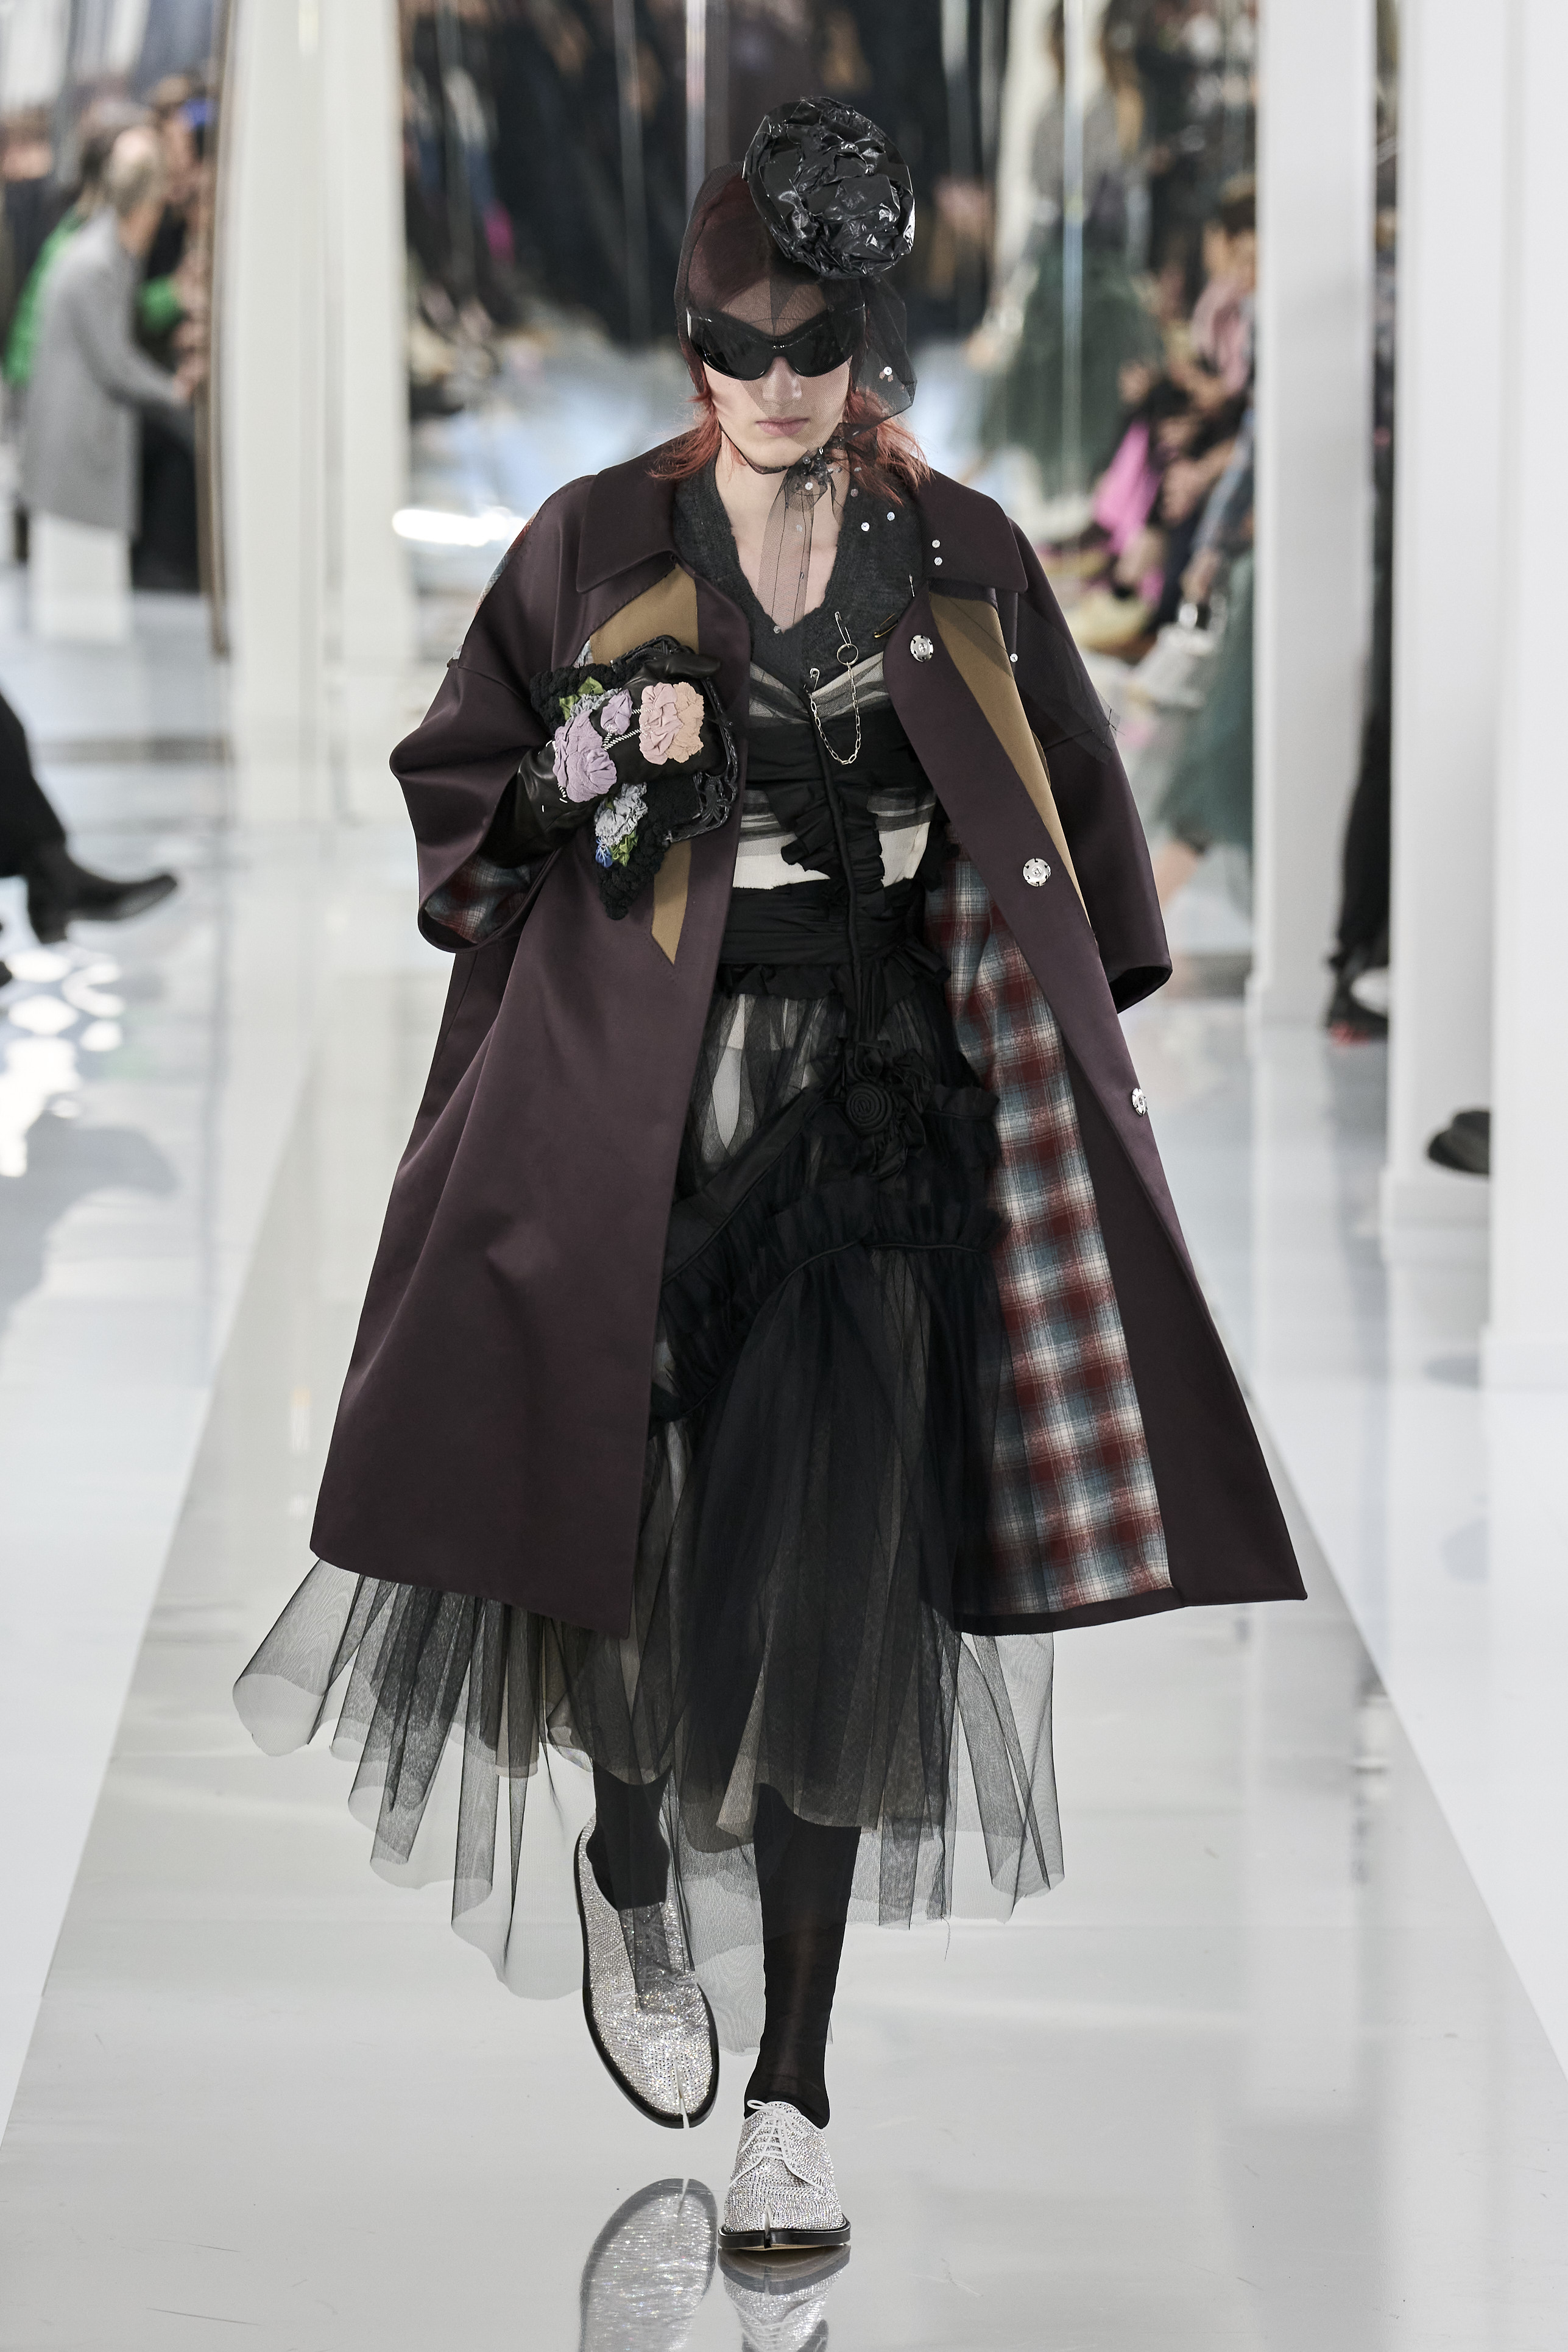 The empire strikes back as ex-Dior designer John Galliano makes his return  to fashion at Margiela, The Independent